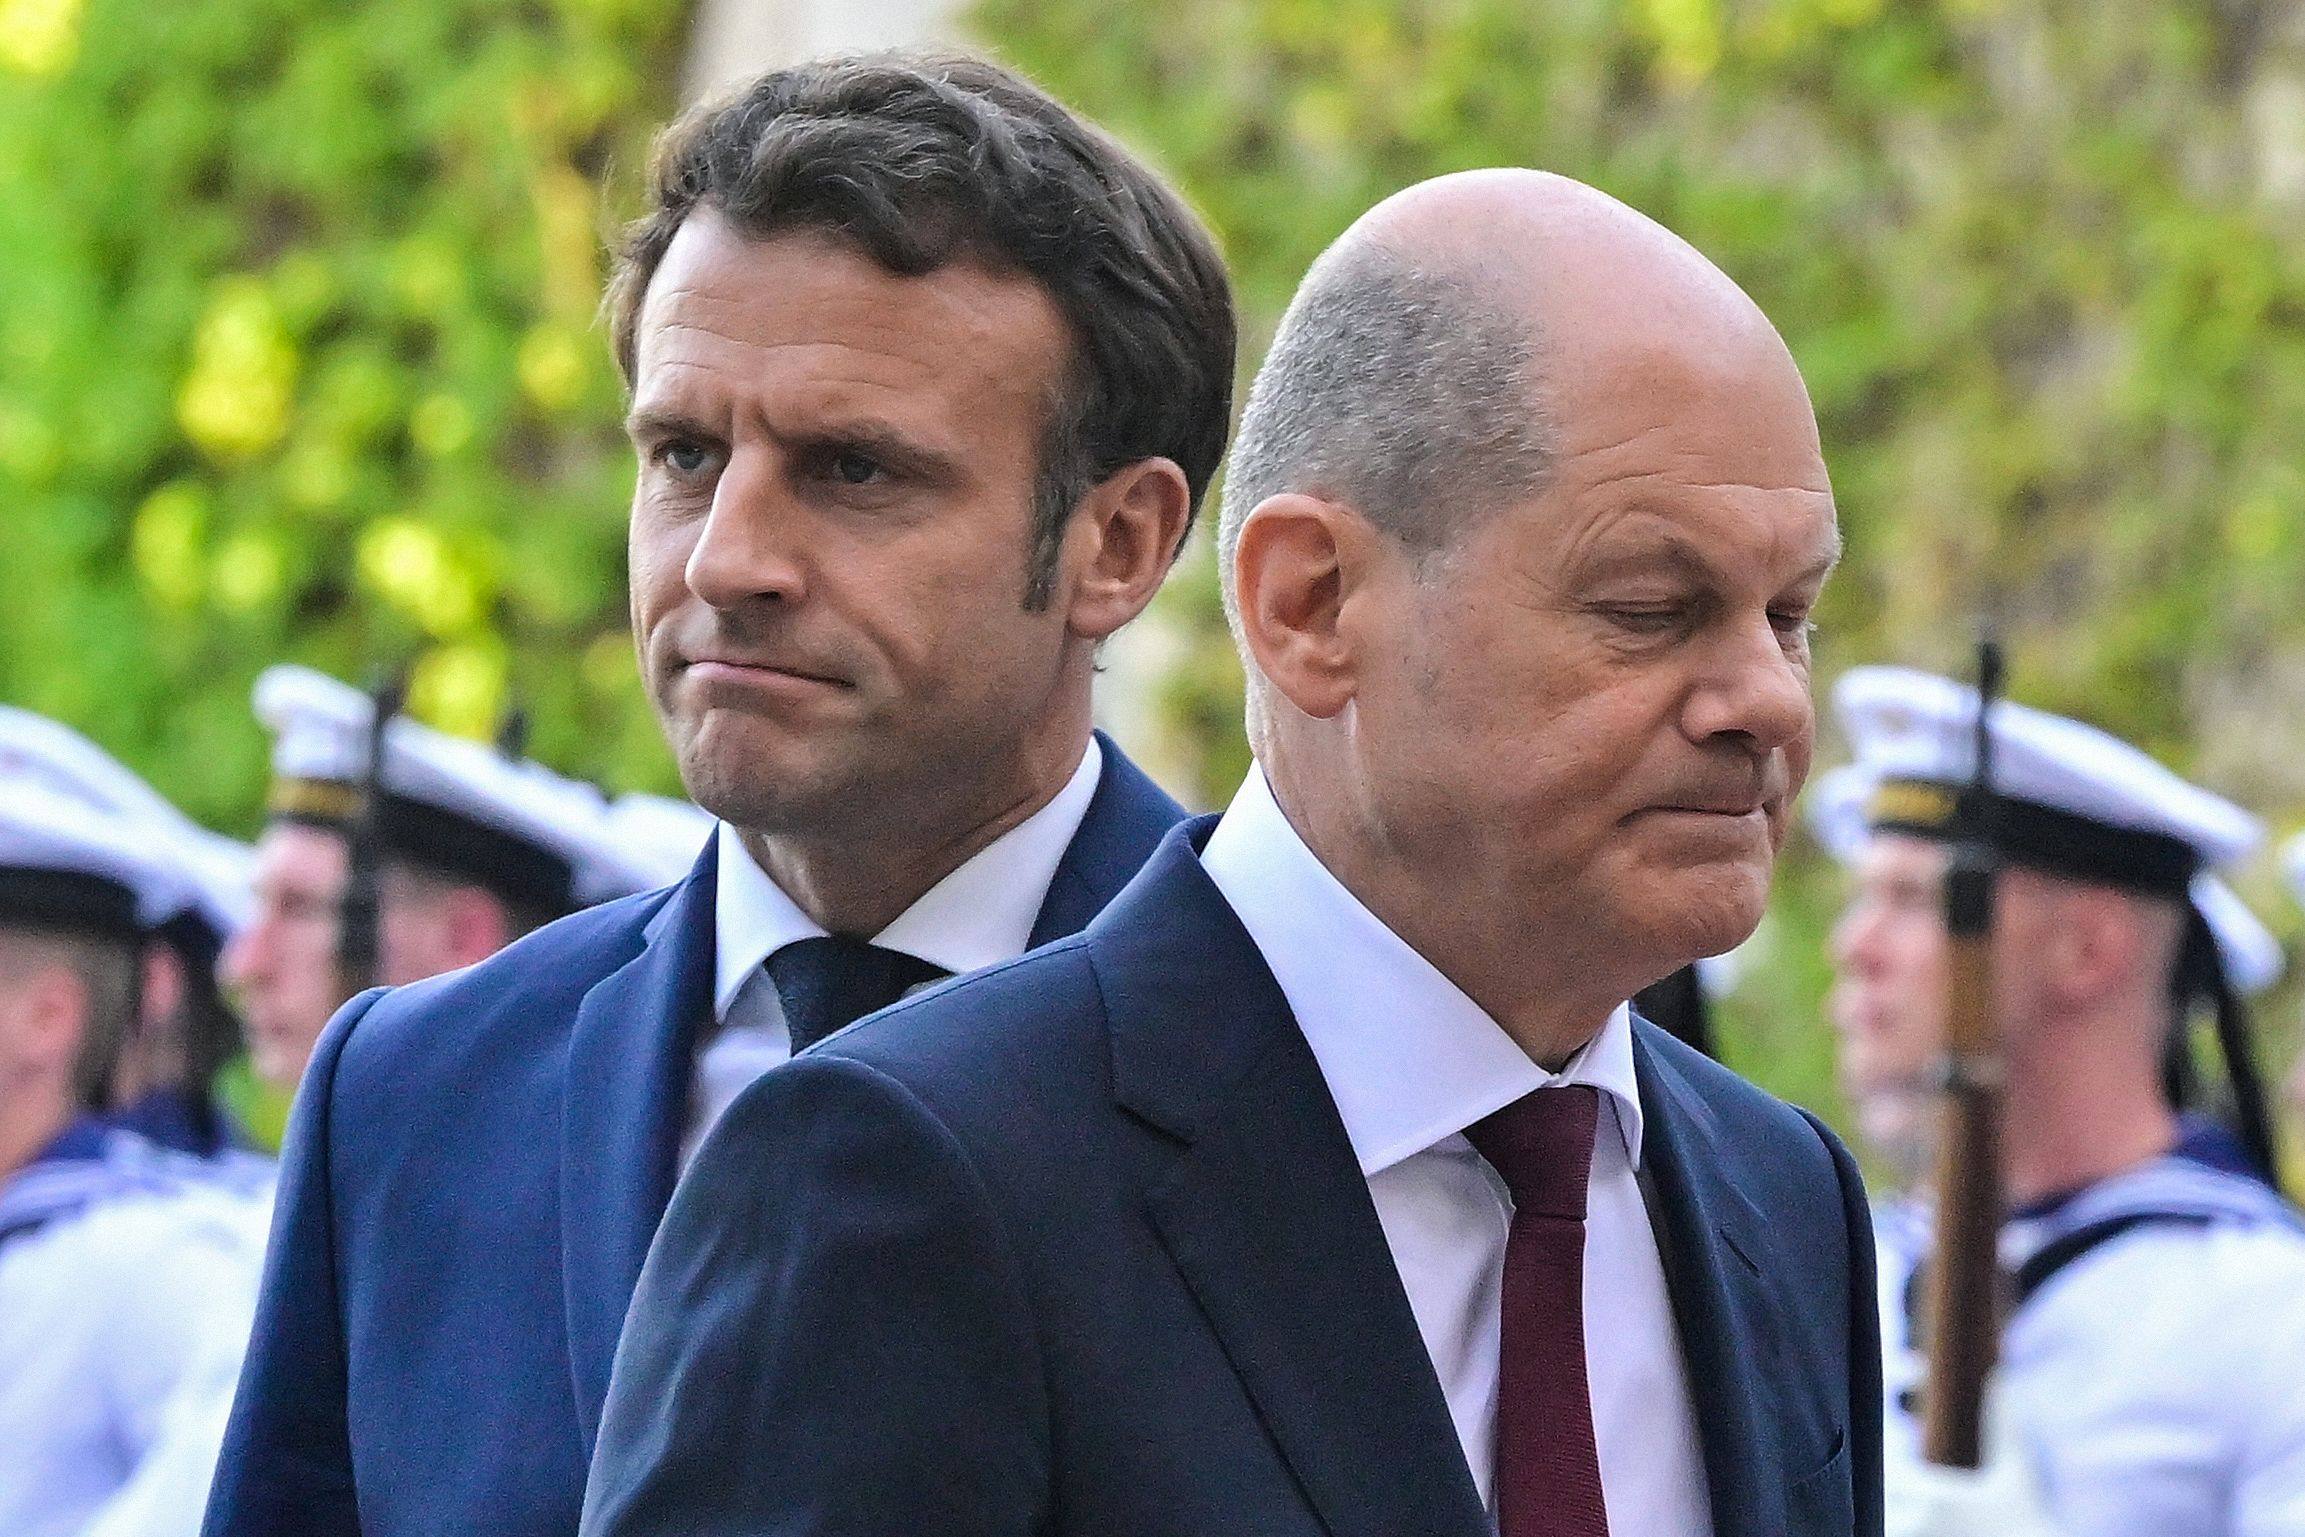 German Chancellor Olaf Scholz (right) and French President Emmanuel Macron inspect an honour guard during a welcome ceremony at the Chancellery in Berlin on May 9. Scholz’s attempts at protecting German interests and competition for European leadership with Macron have complicated Europe’s efforts to reach a coherent China policy. Photo: AFP